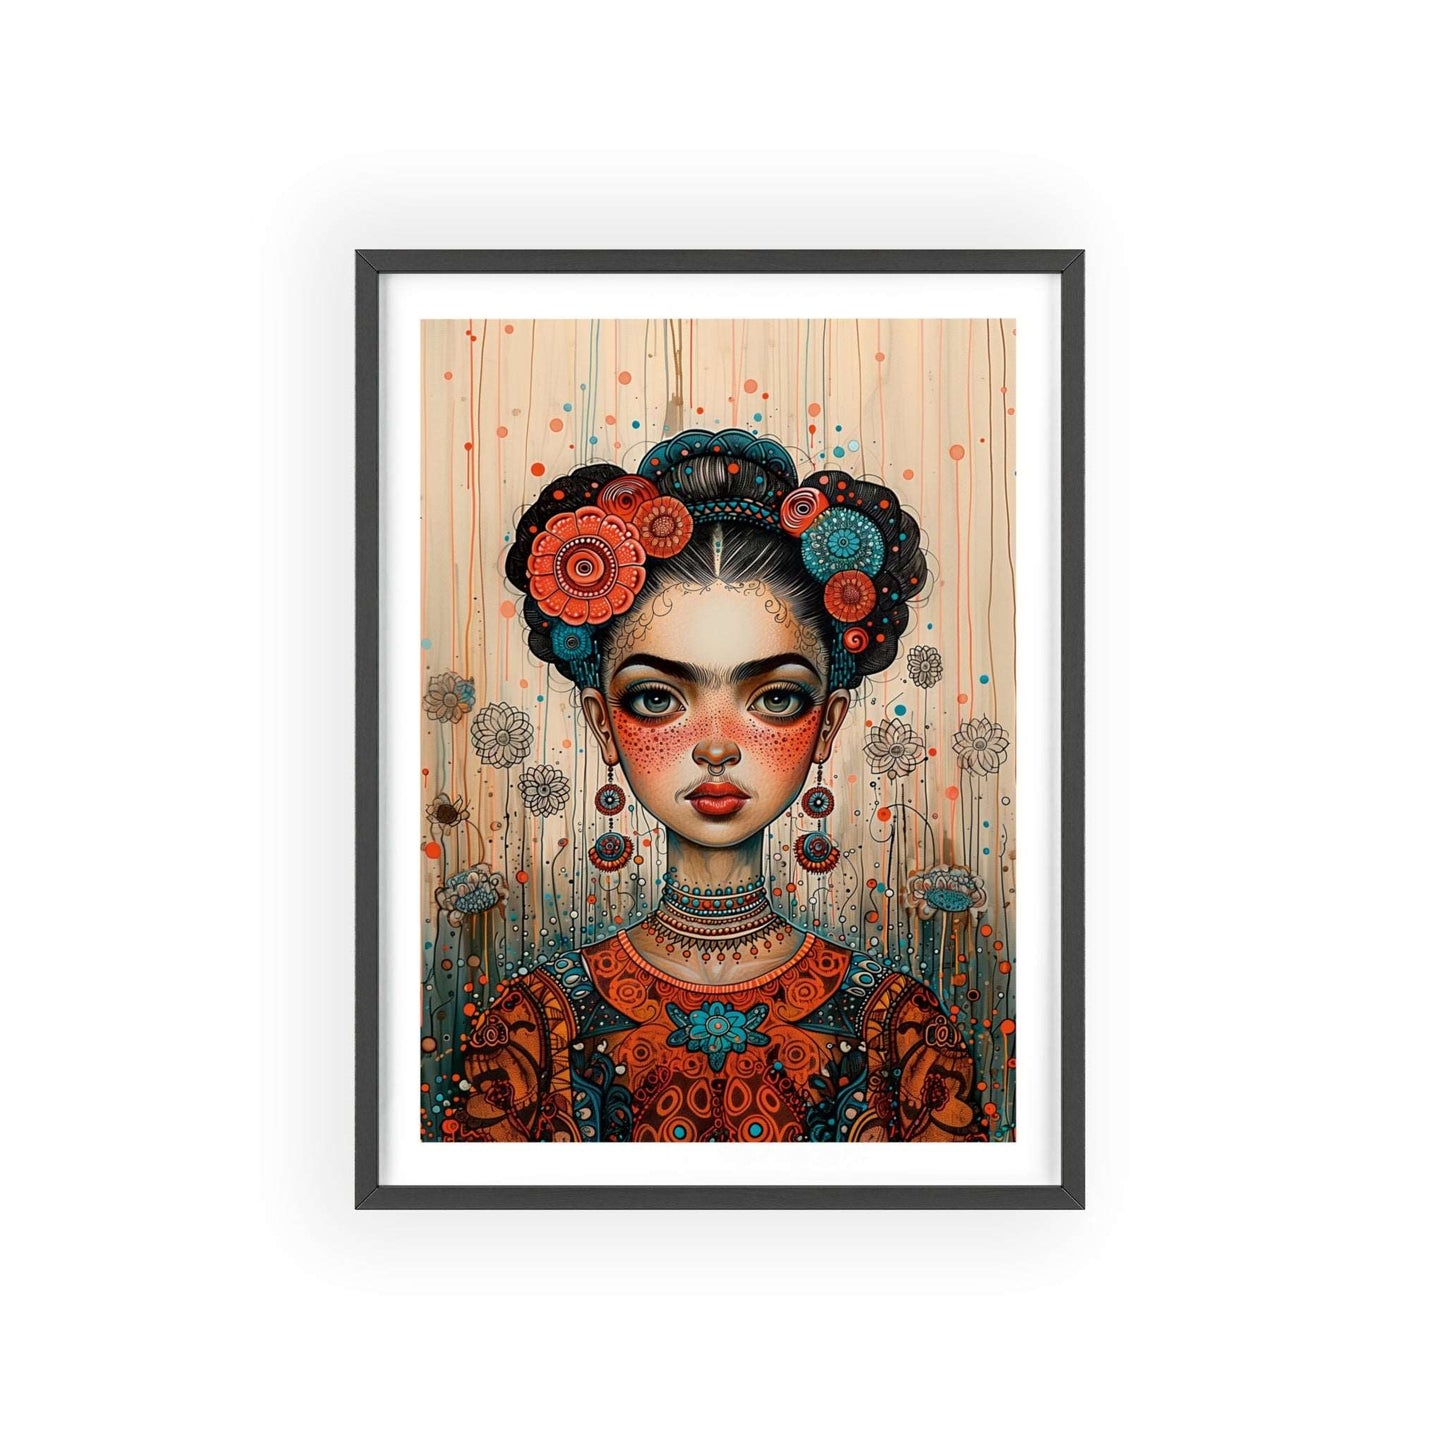 Framed poster titled "Frida in the Timeless Metaverse - Portrait". The poster depicts Frida Kahlo in a style reminiscent of Mab Graves and Klimt